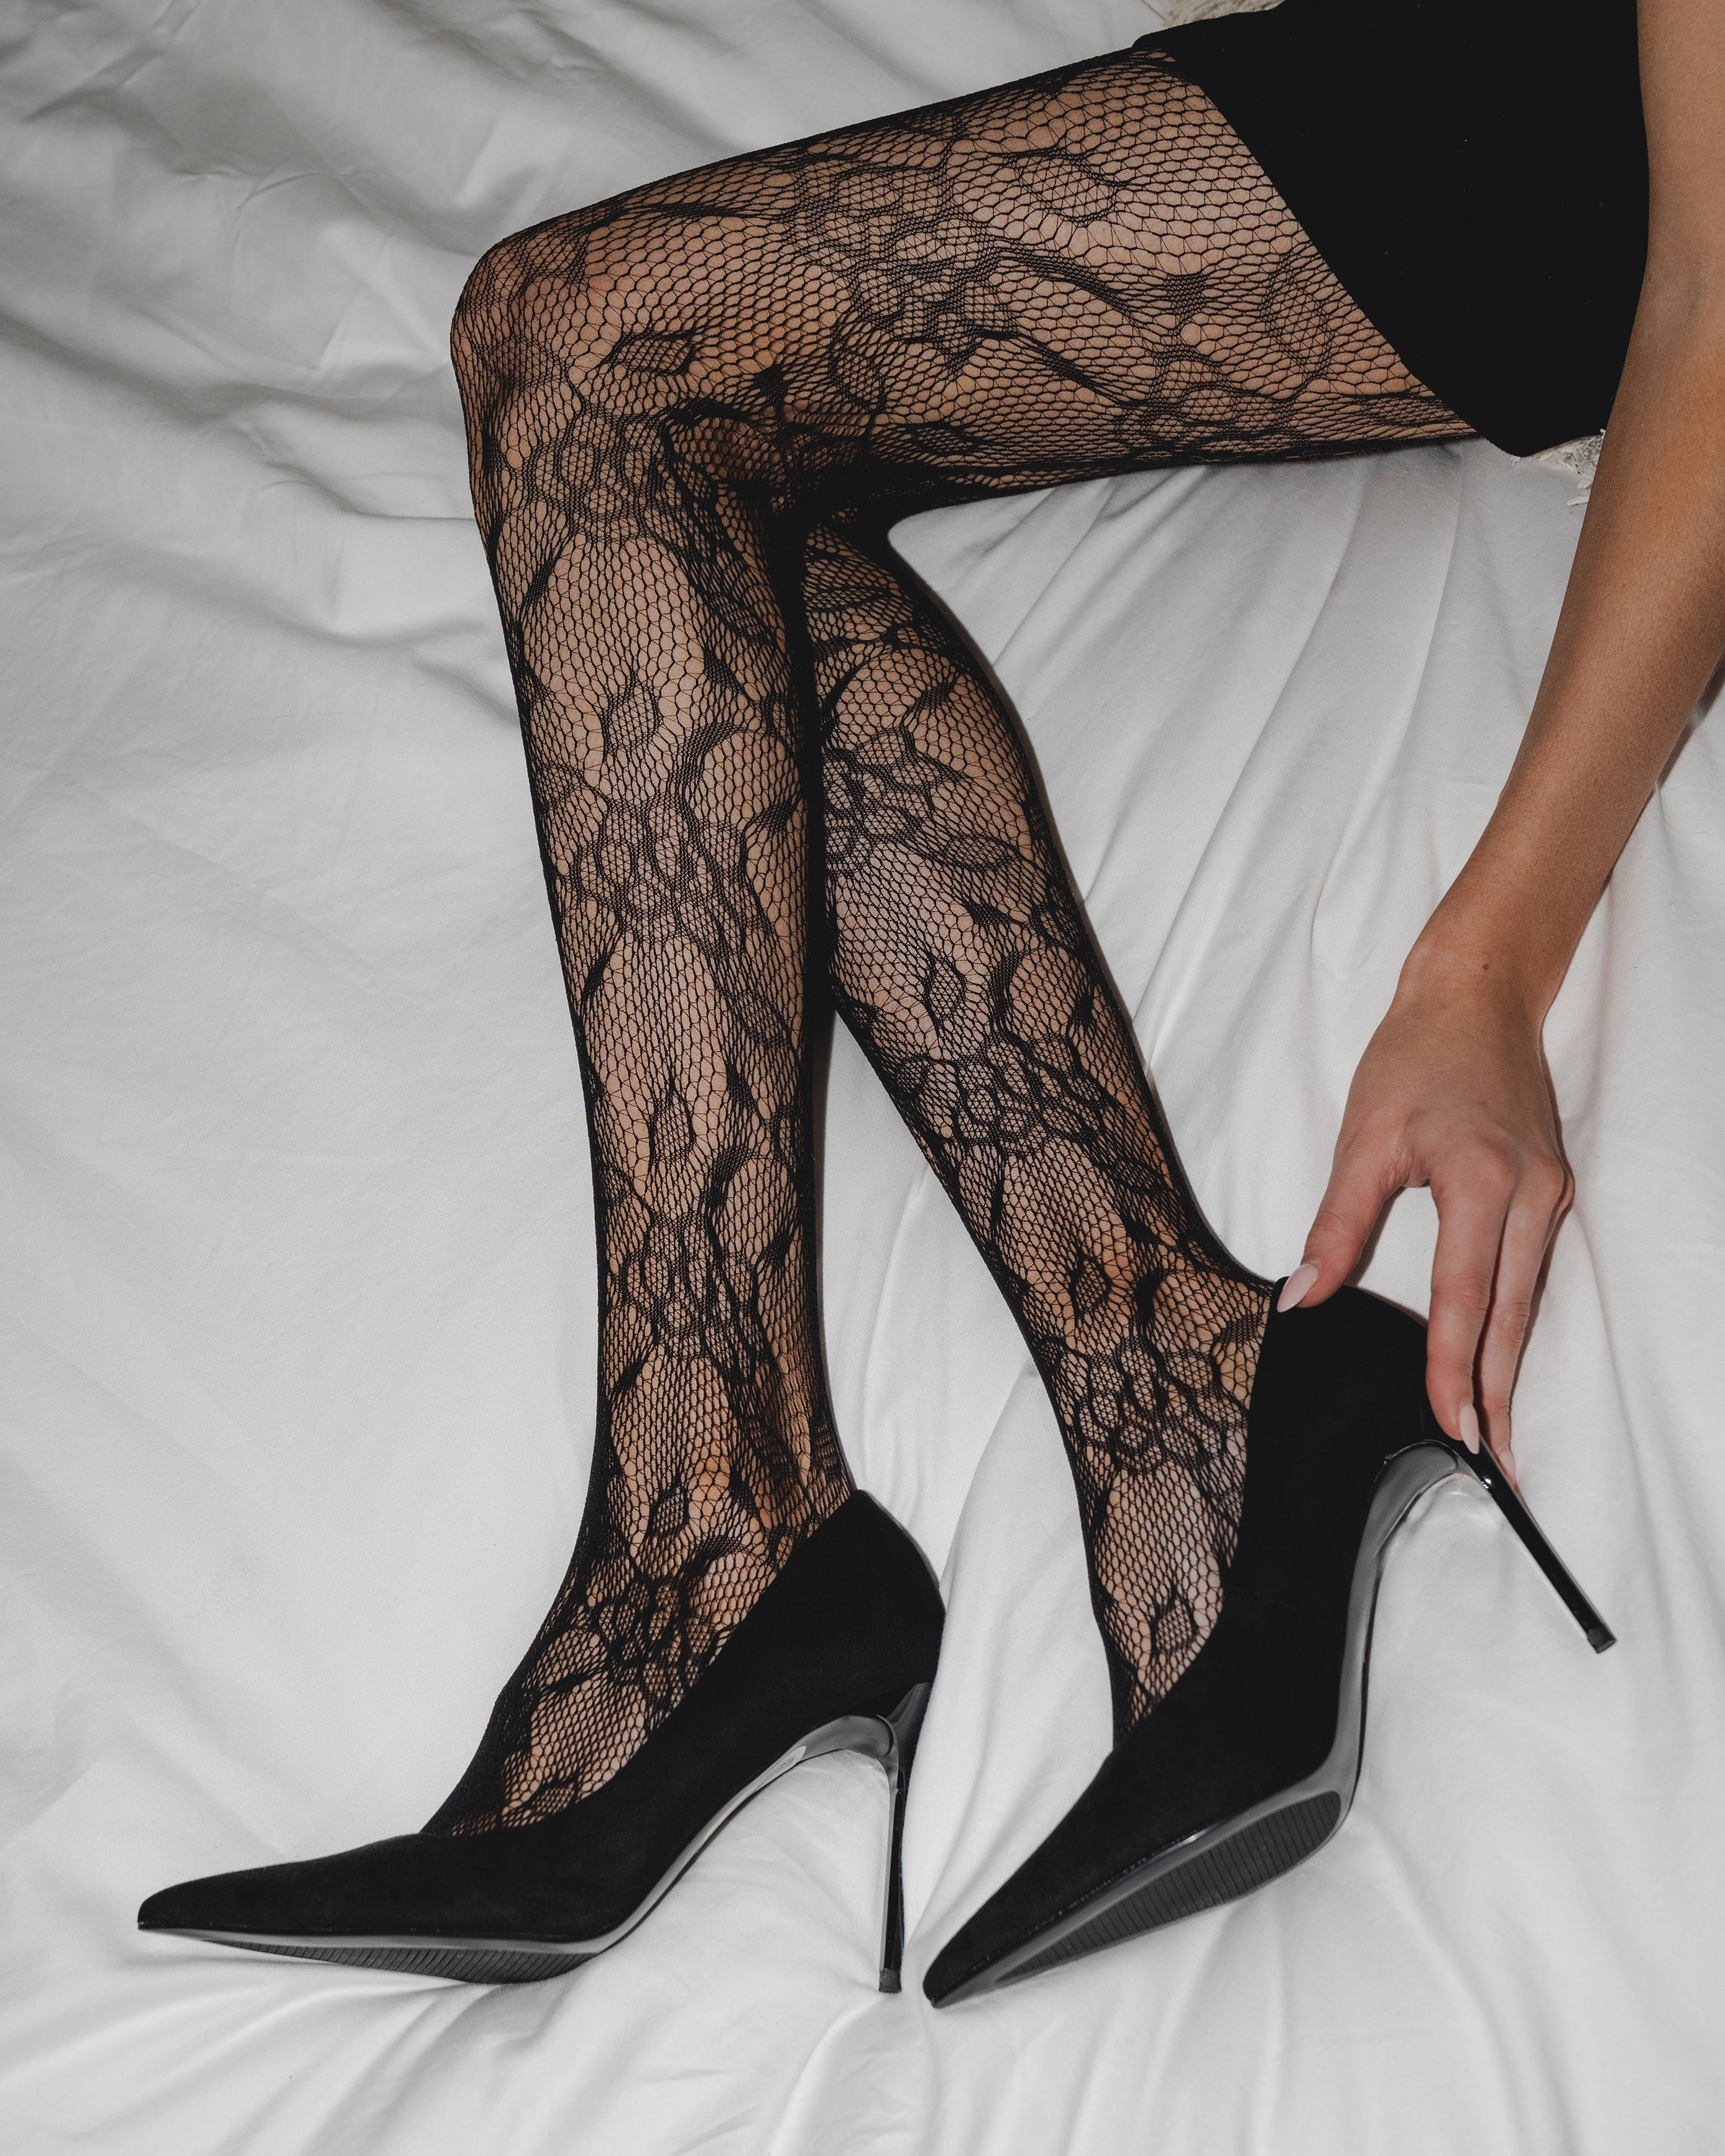 Floral Lace Tights Black For Women | Ladies Lacy Pantyhose | Perfect Gift  For Her